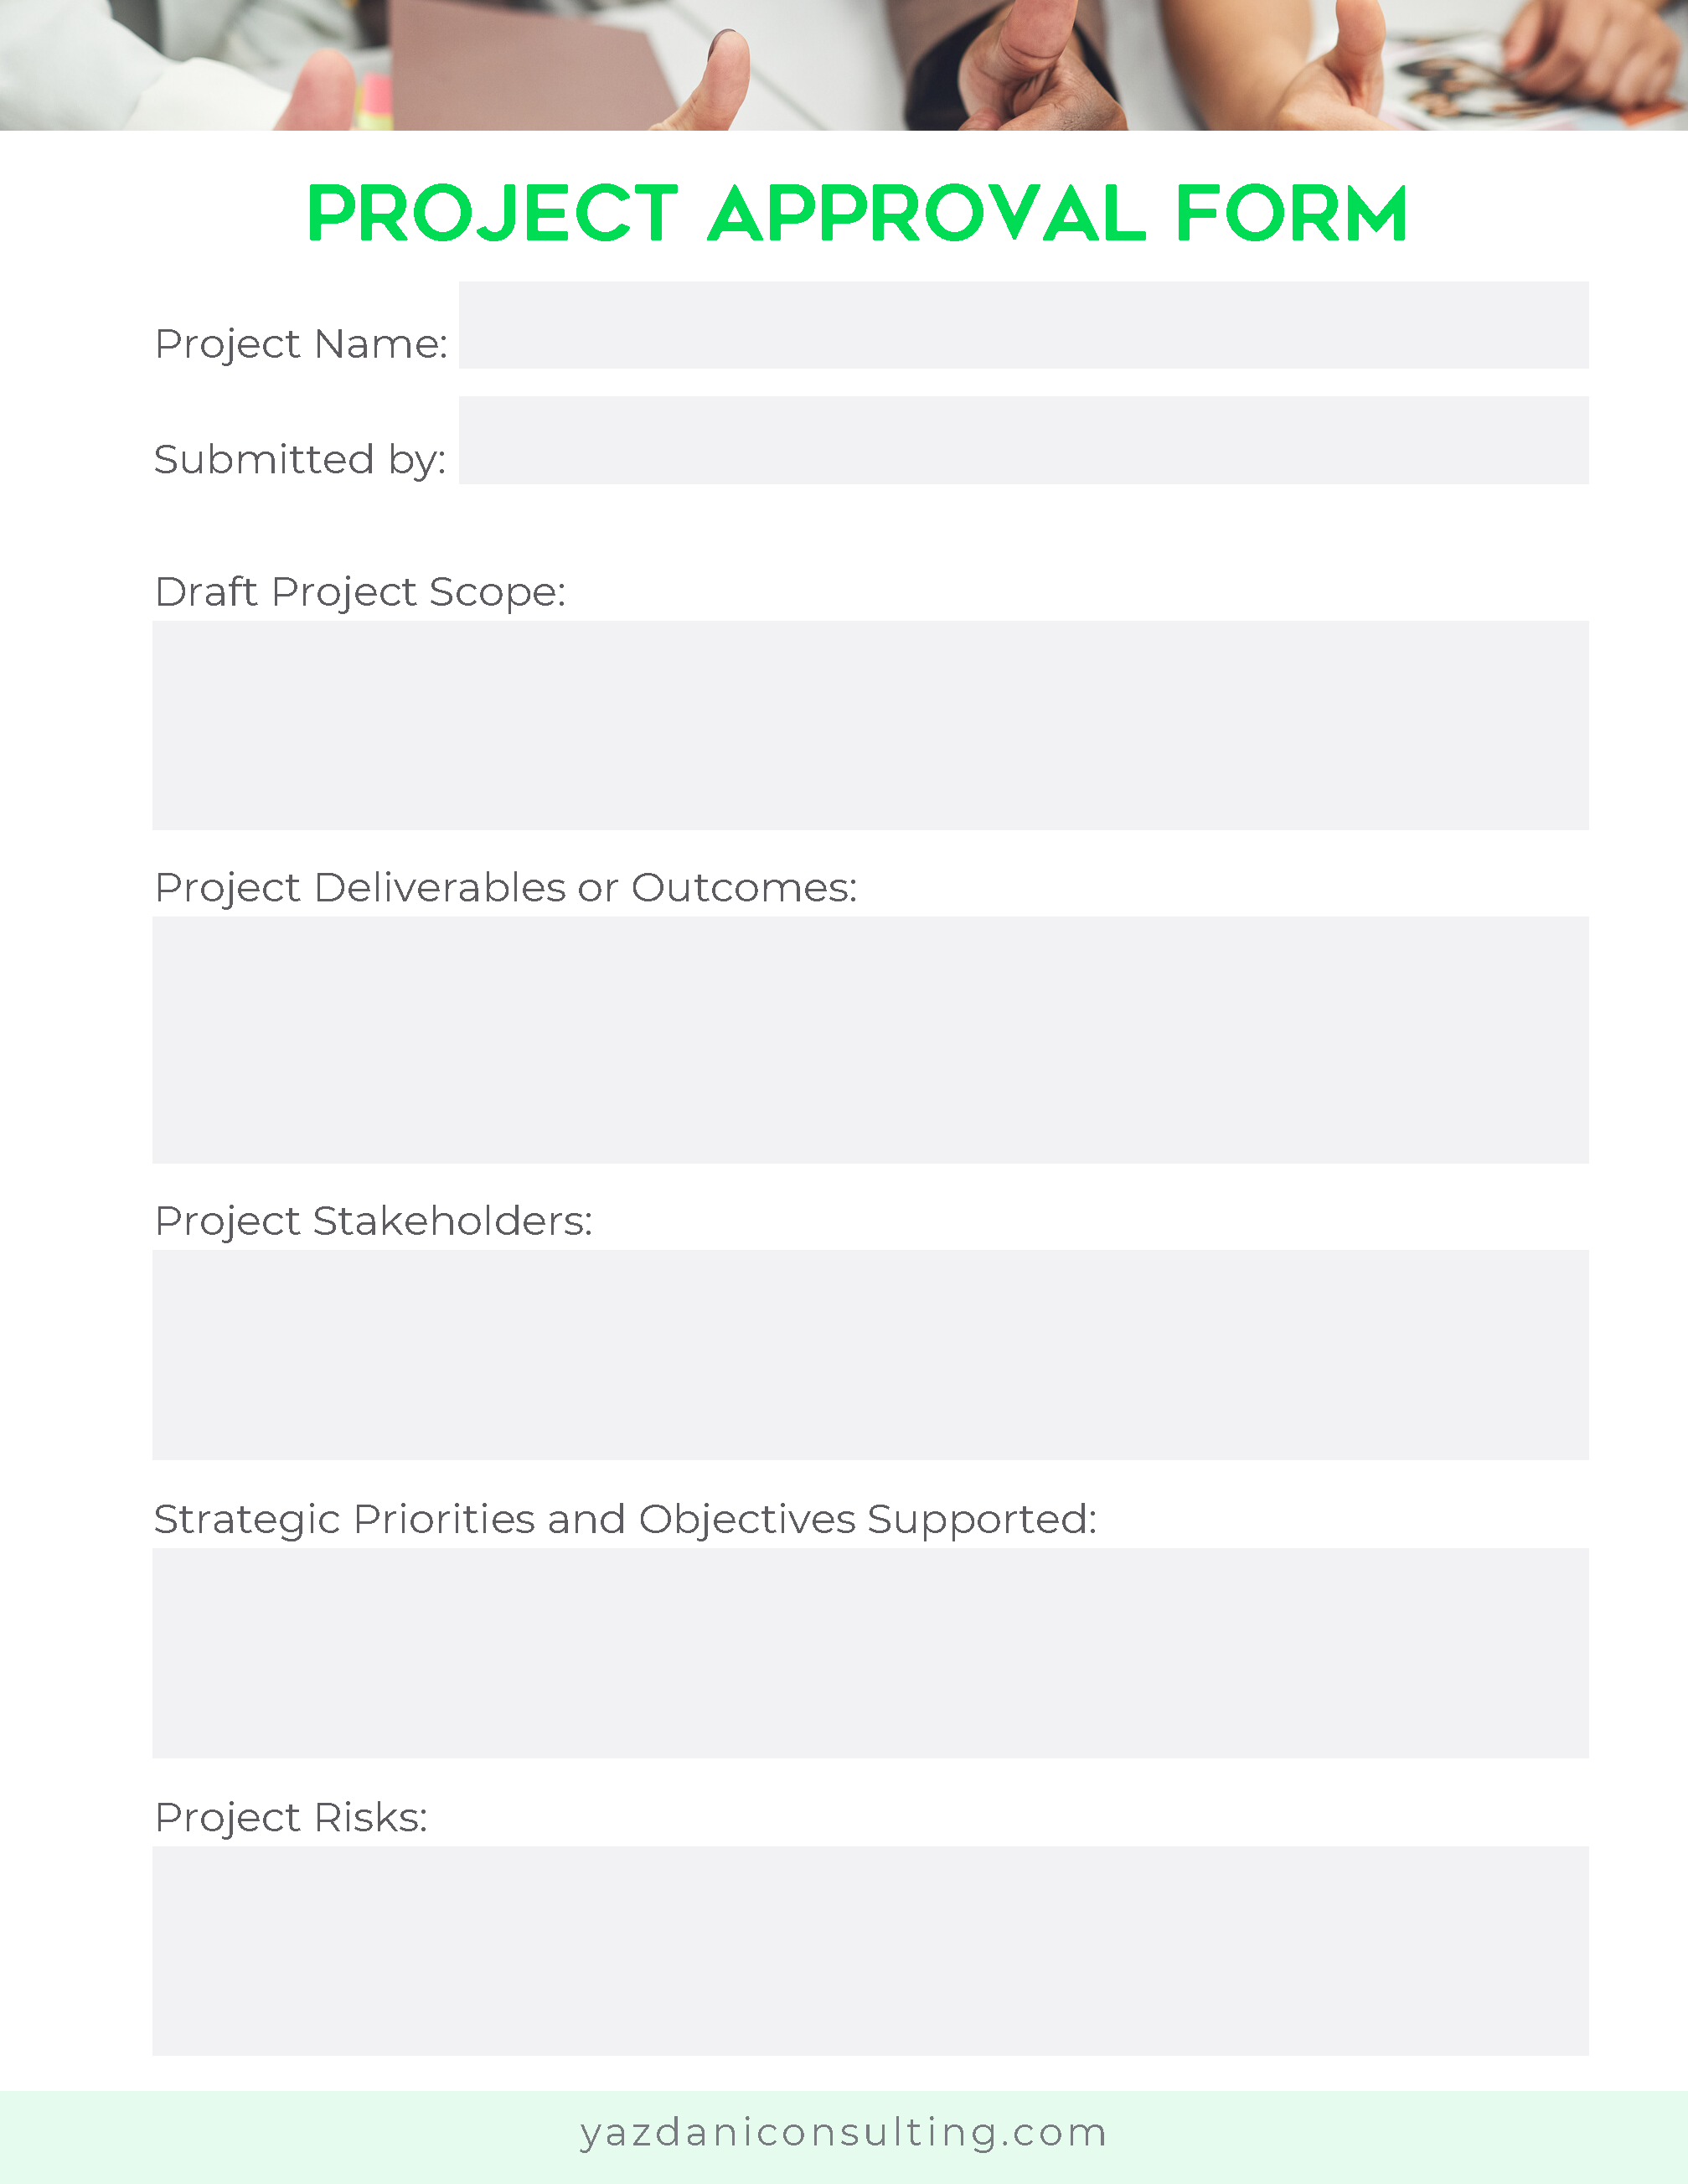 Project Approval Template_Page_2.png